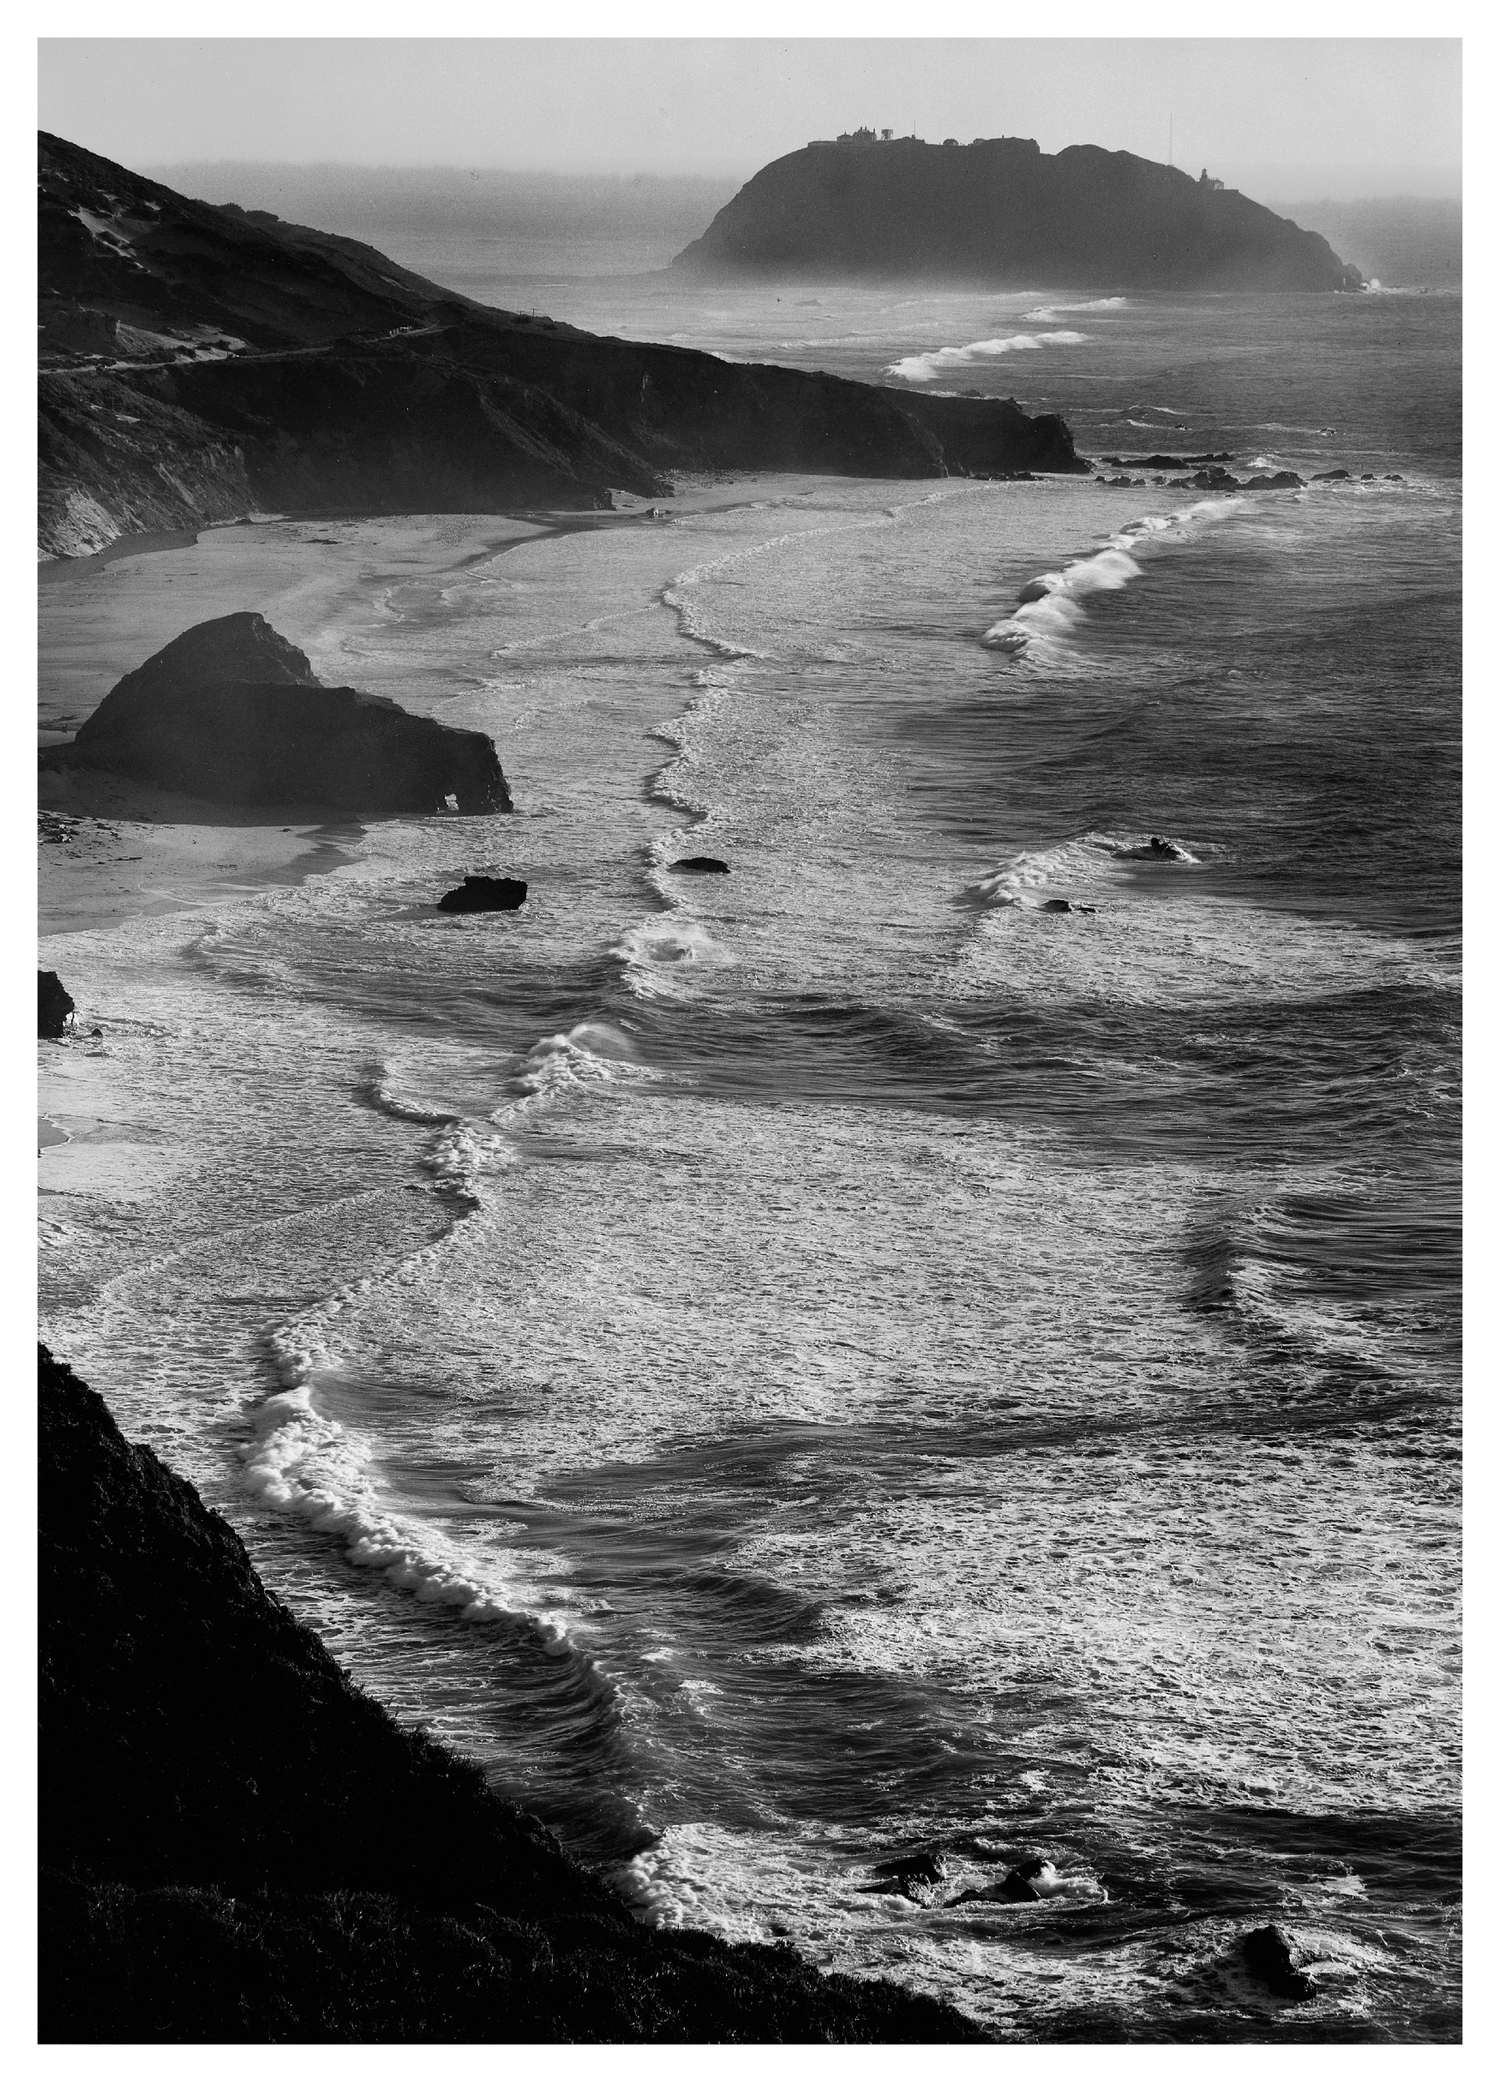 POINT SUR, STORM - ANSEL ADAMS SMALL MATTED REPRODUCTION